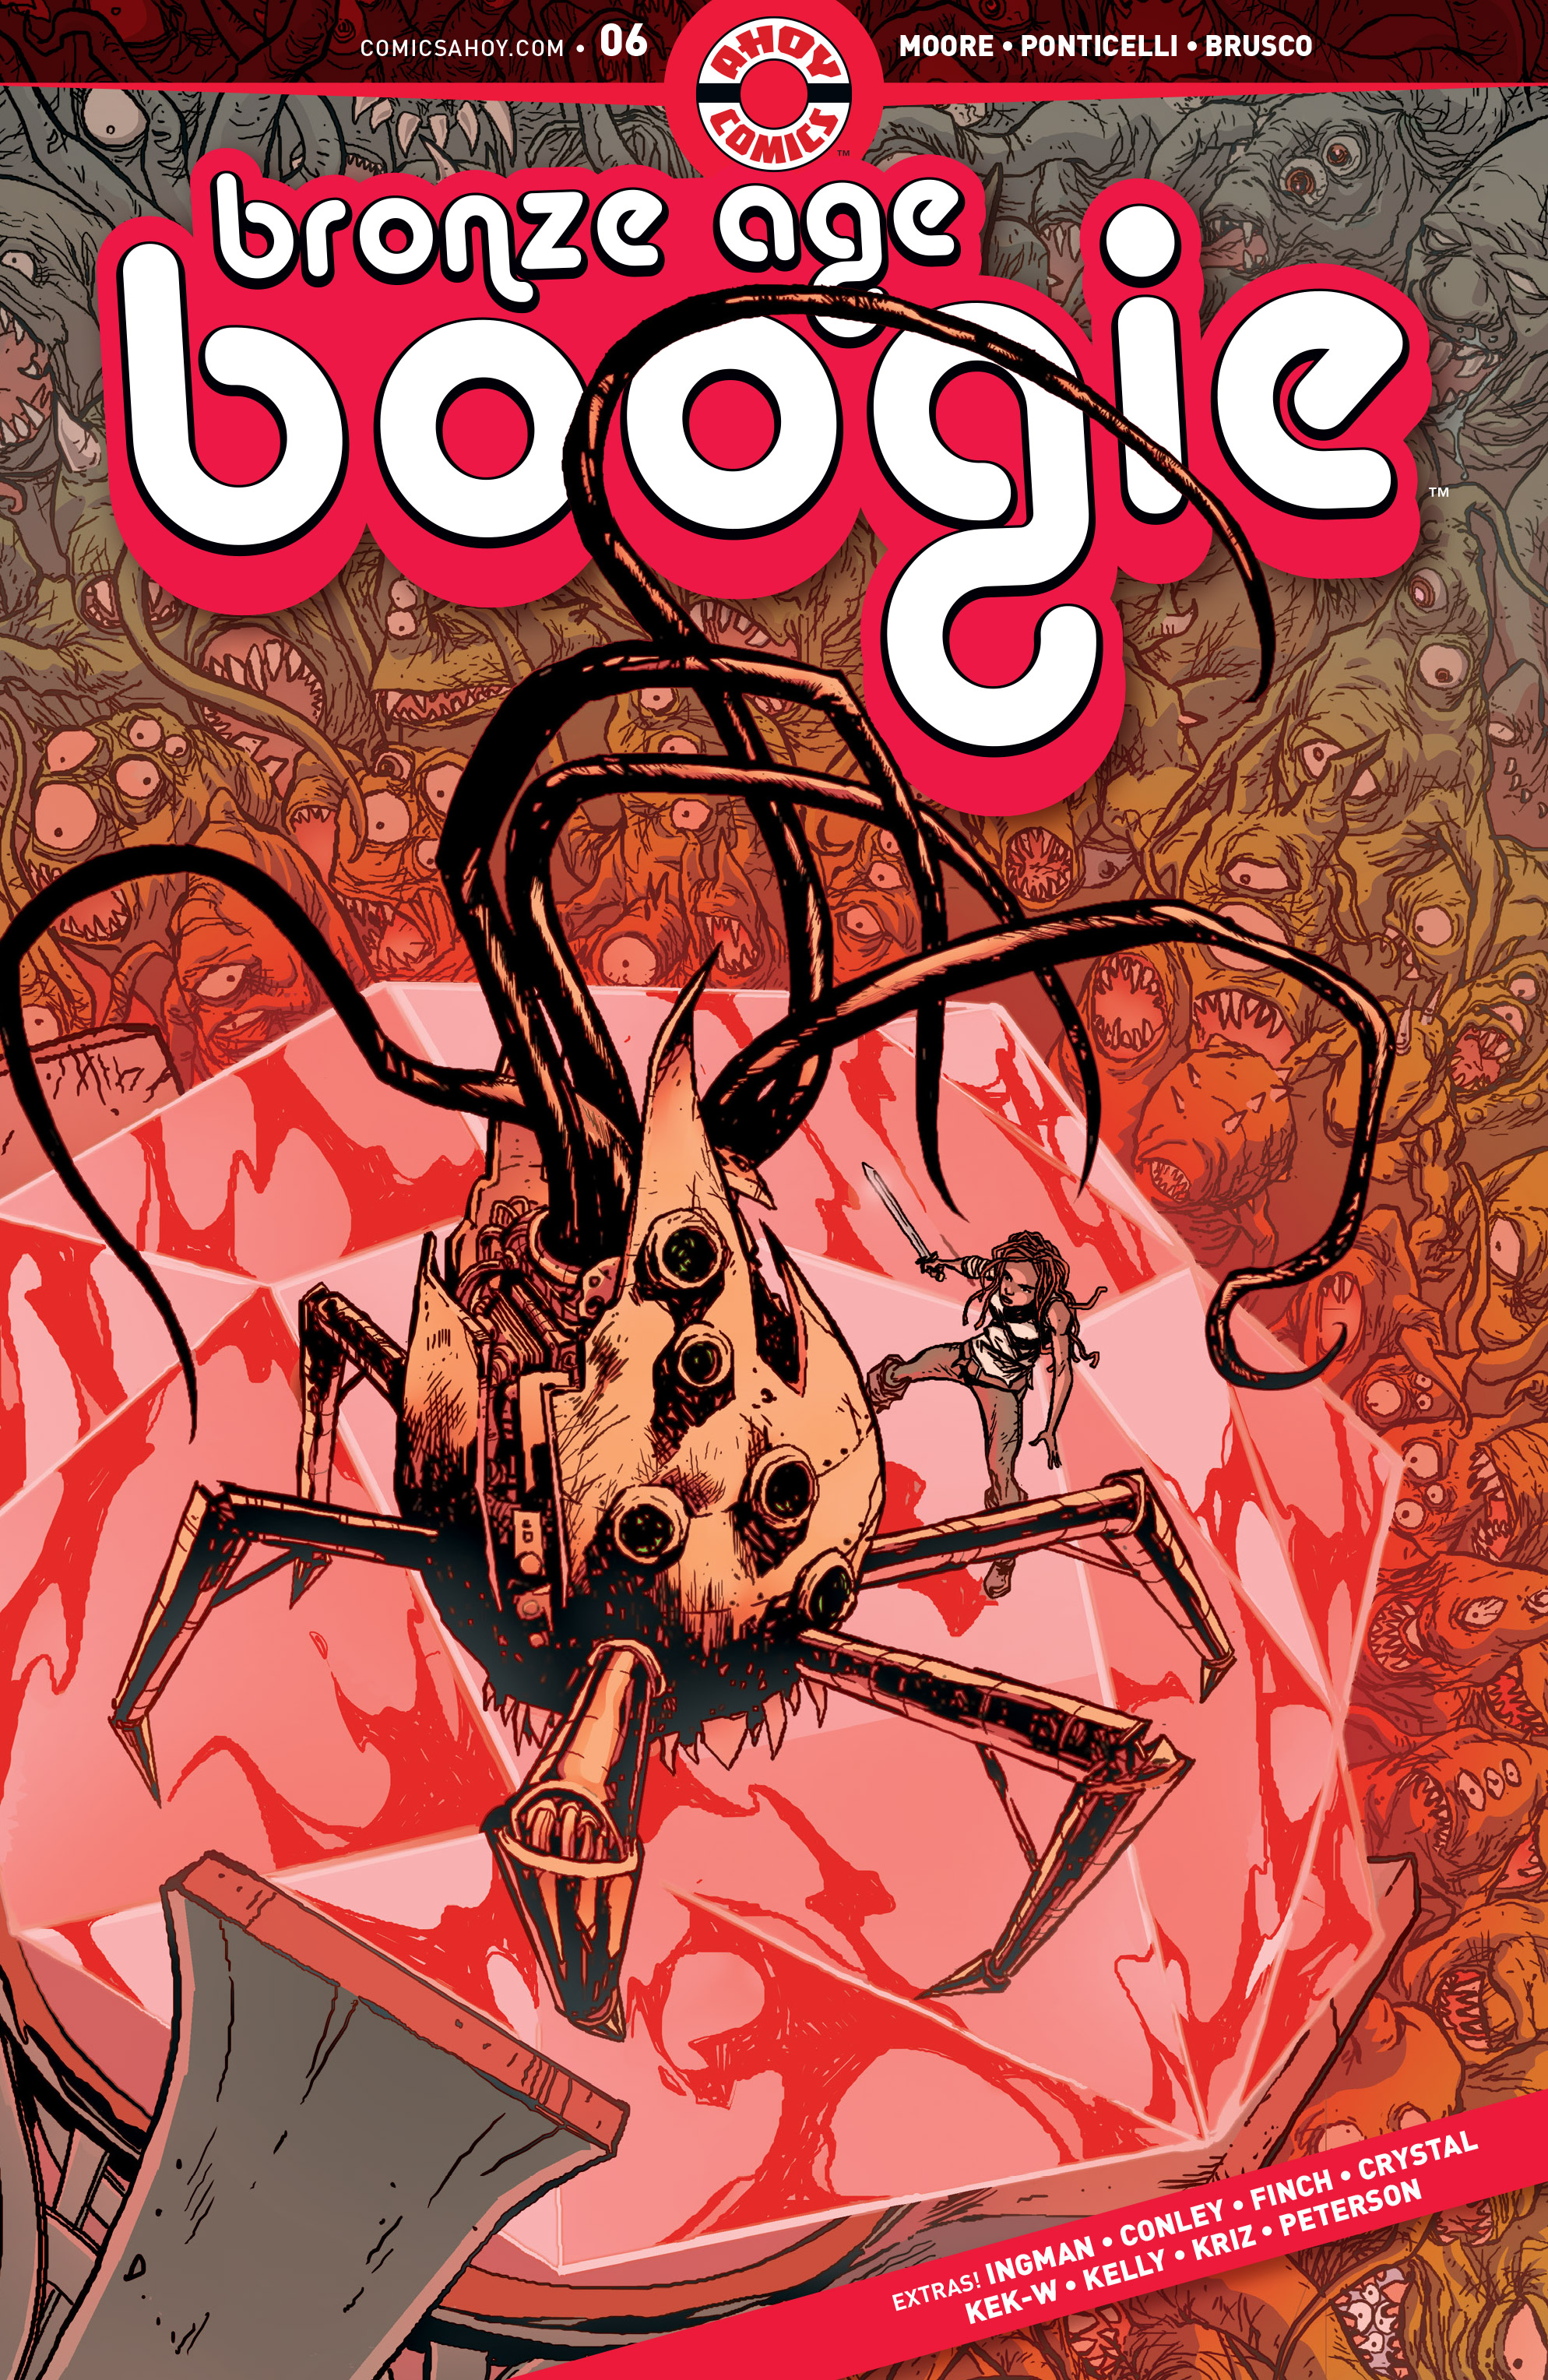 Read online Bronze Age Boogie comic -  Issue #6 - 1